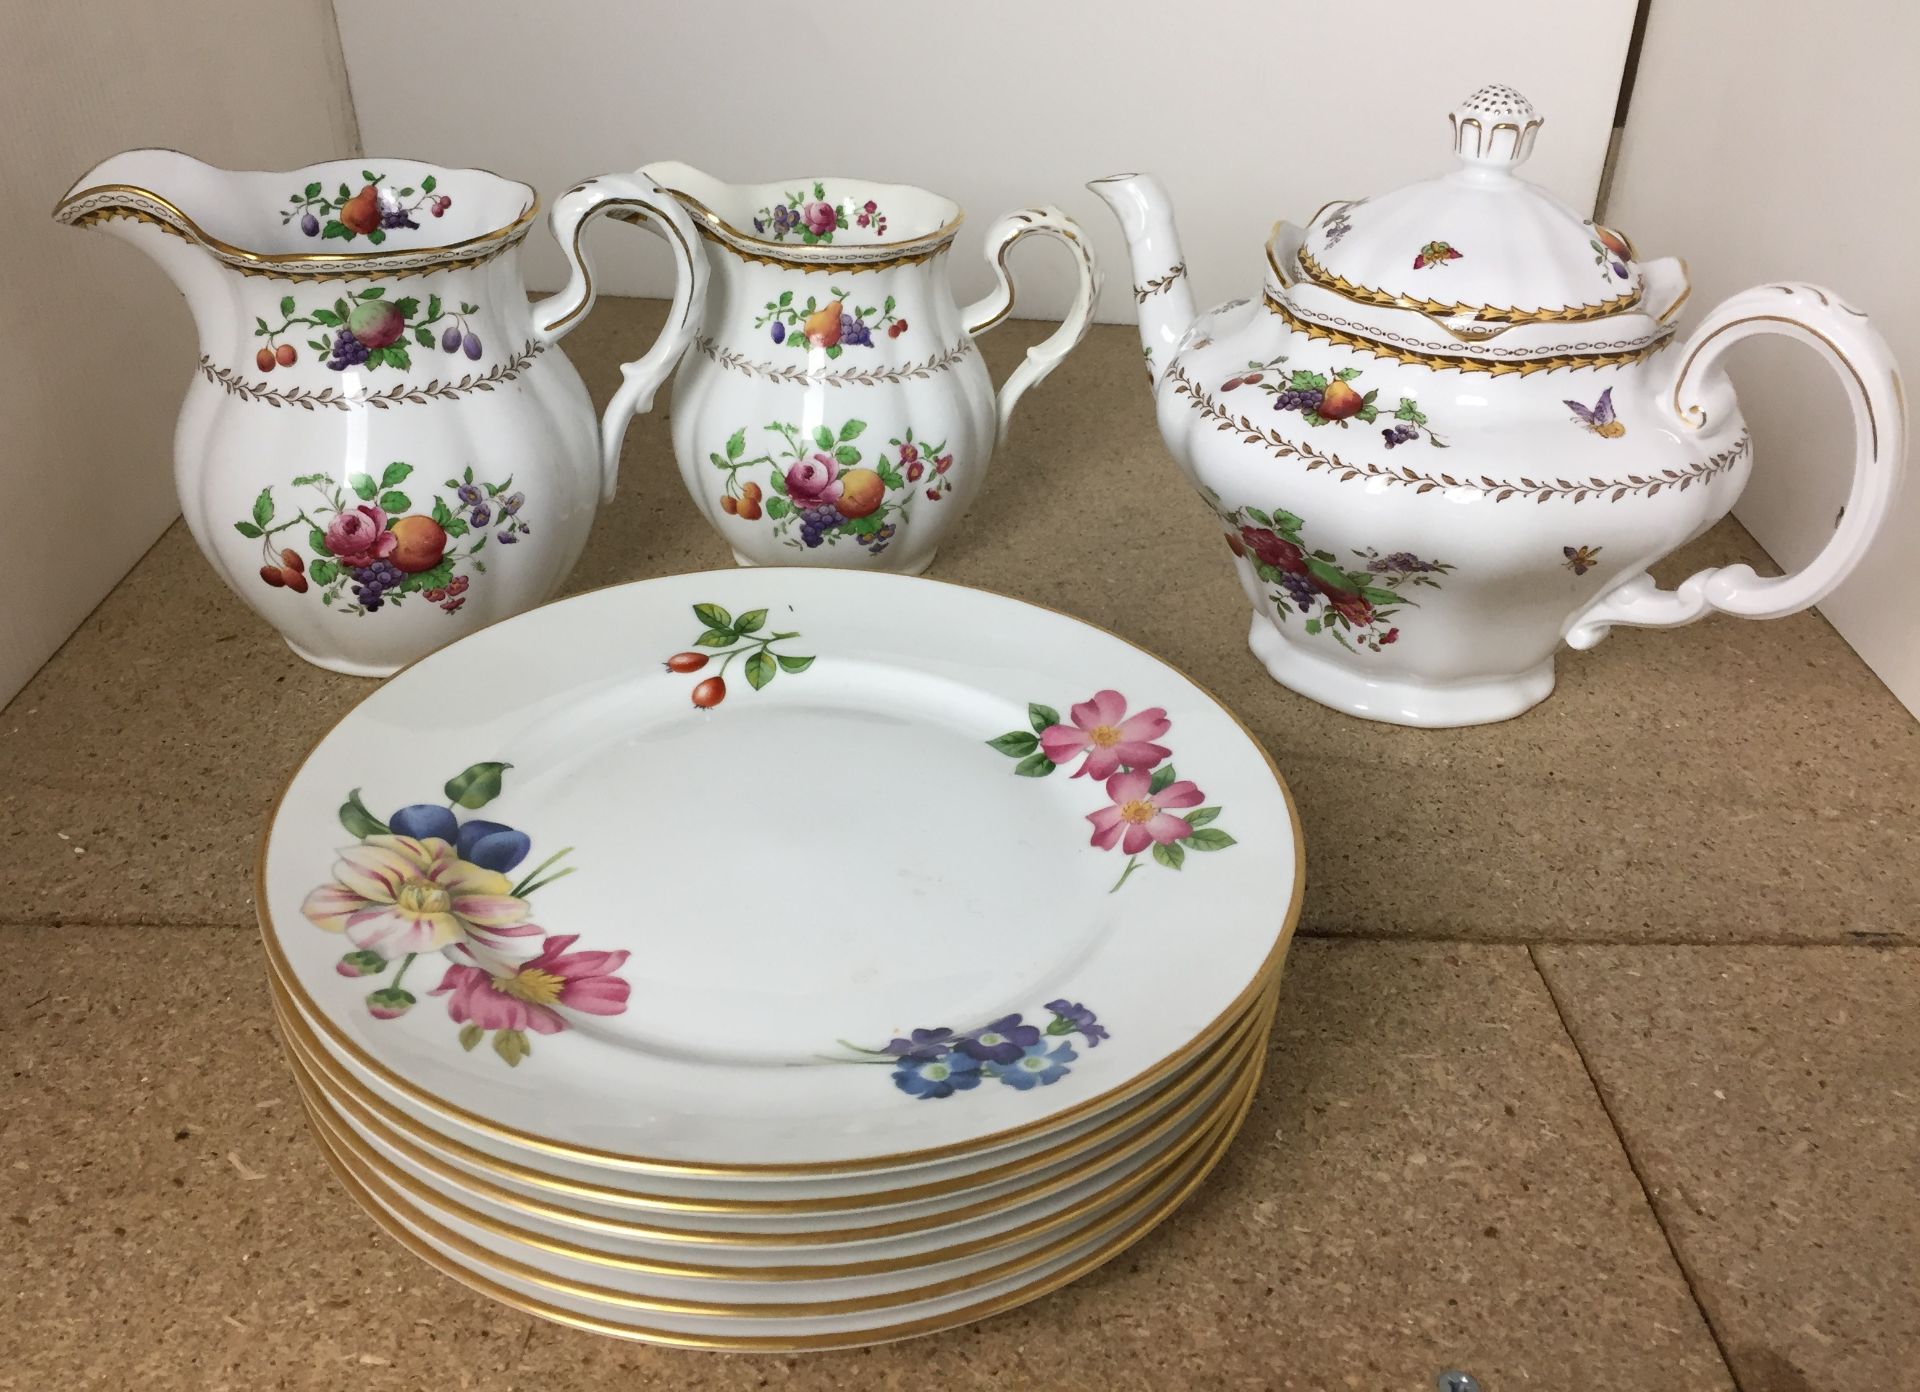 Nine items including Spode Rockingham teapot and two jugs (exclusive to Harrods) and six Royal